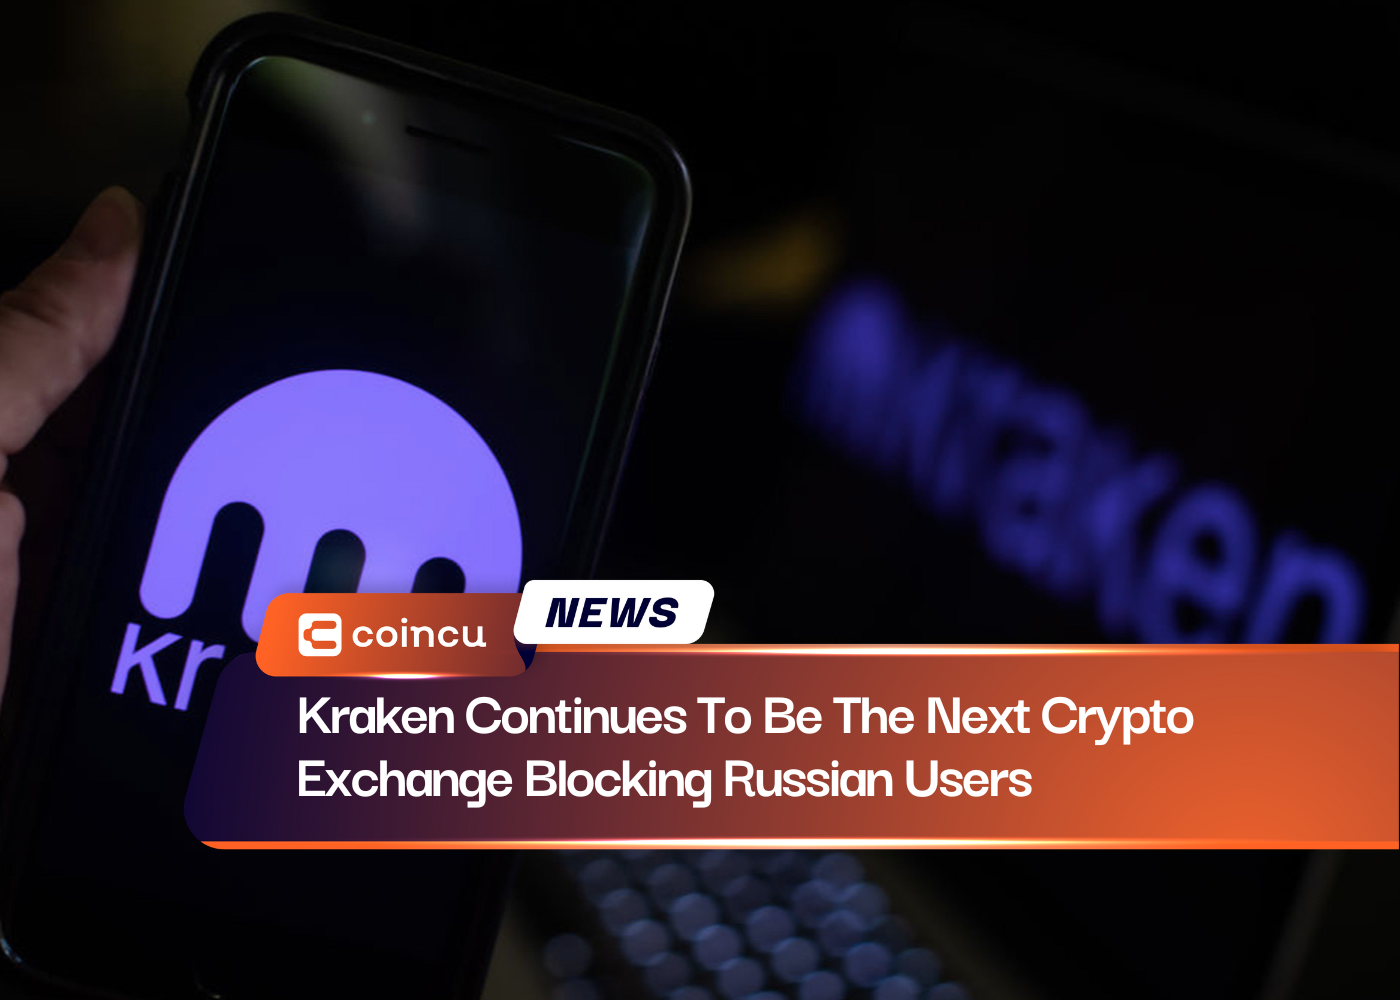 Kraken Continues To Be The Next Crypto Exchange Blocking Russian Users